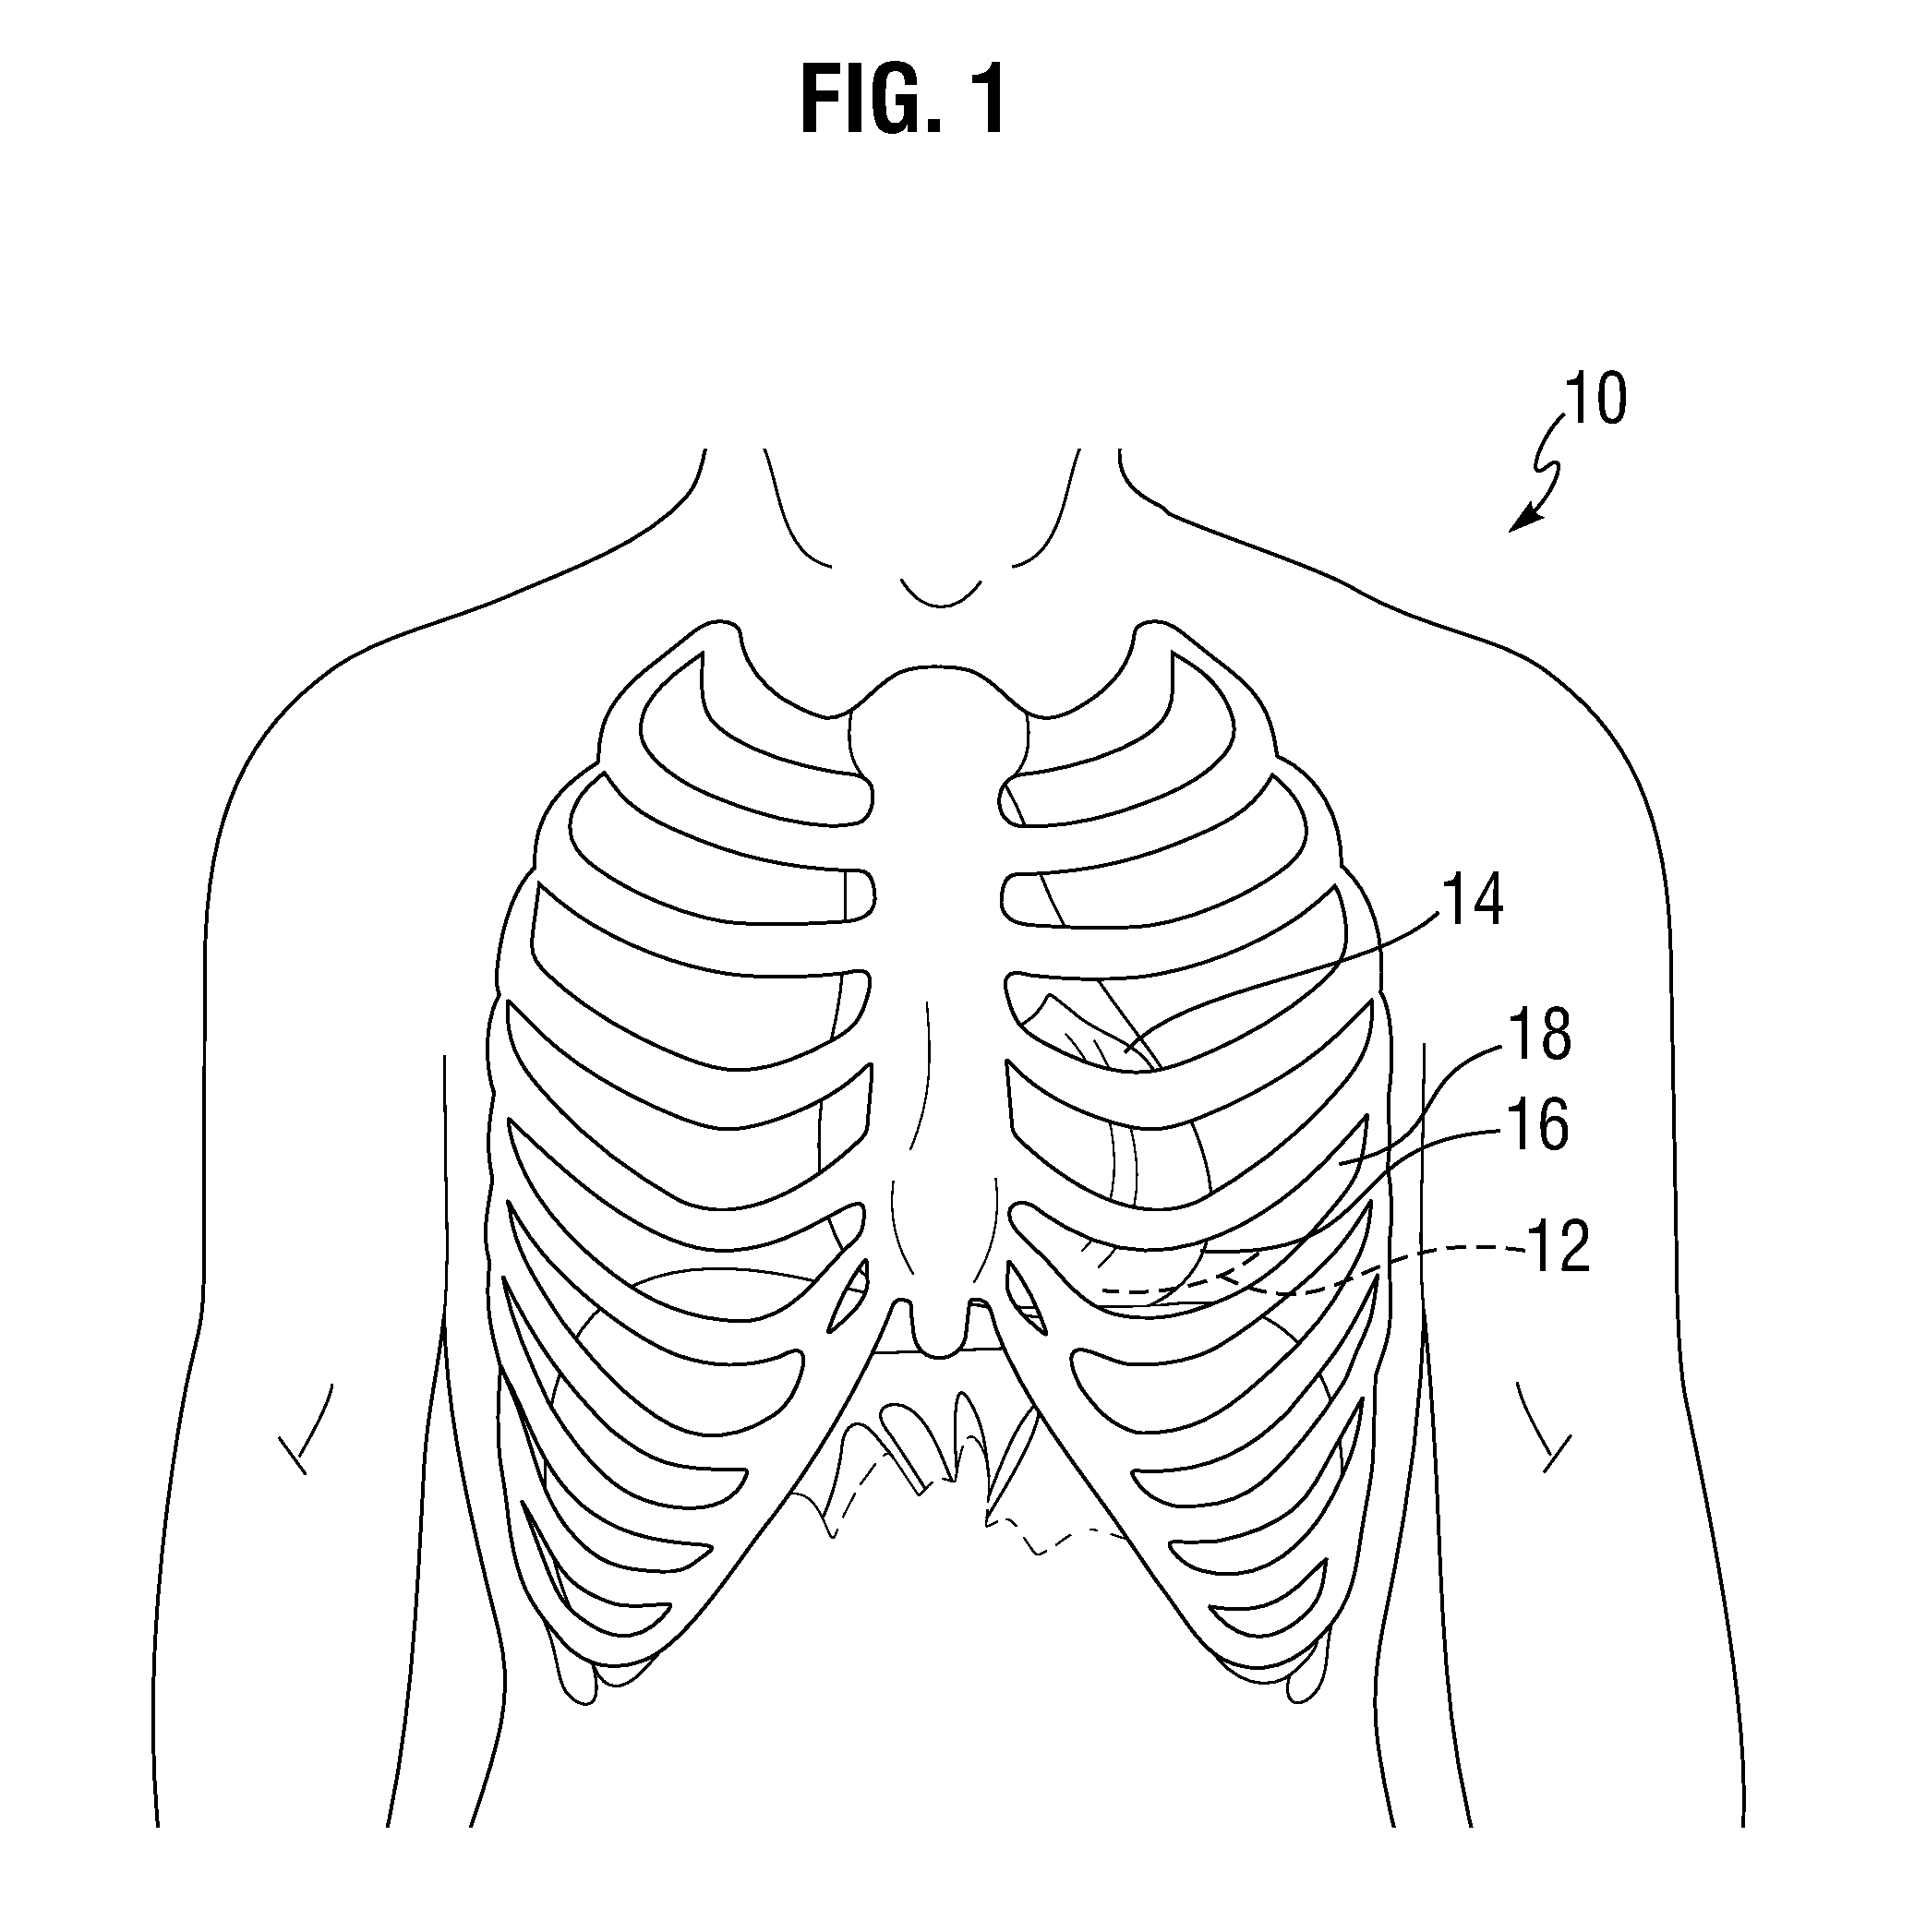 Surgical stabilizer and closure system